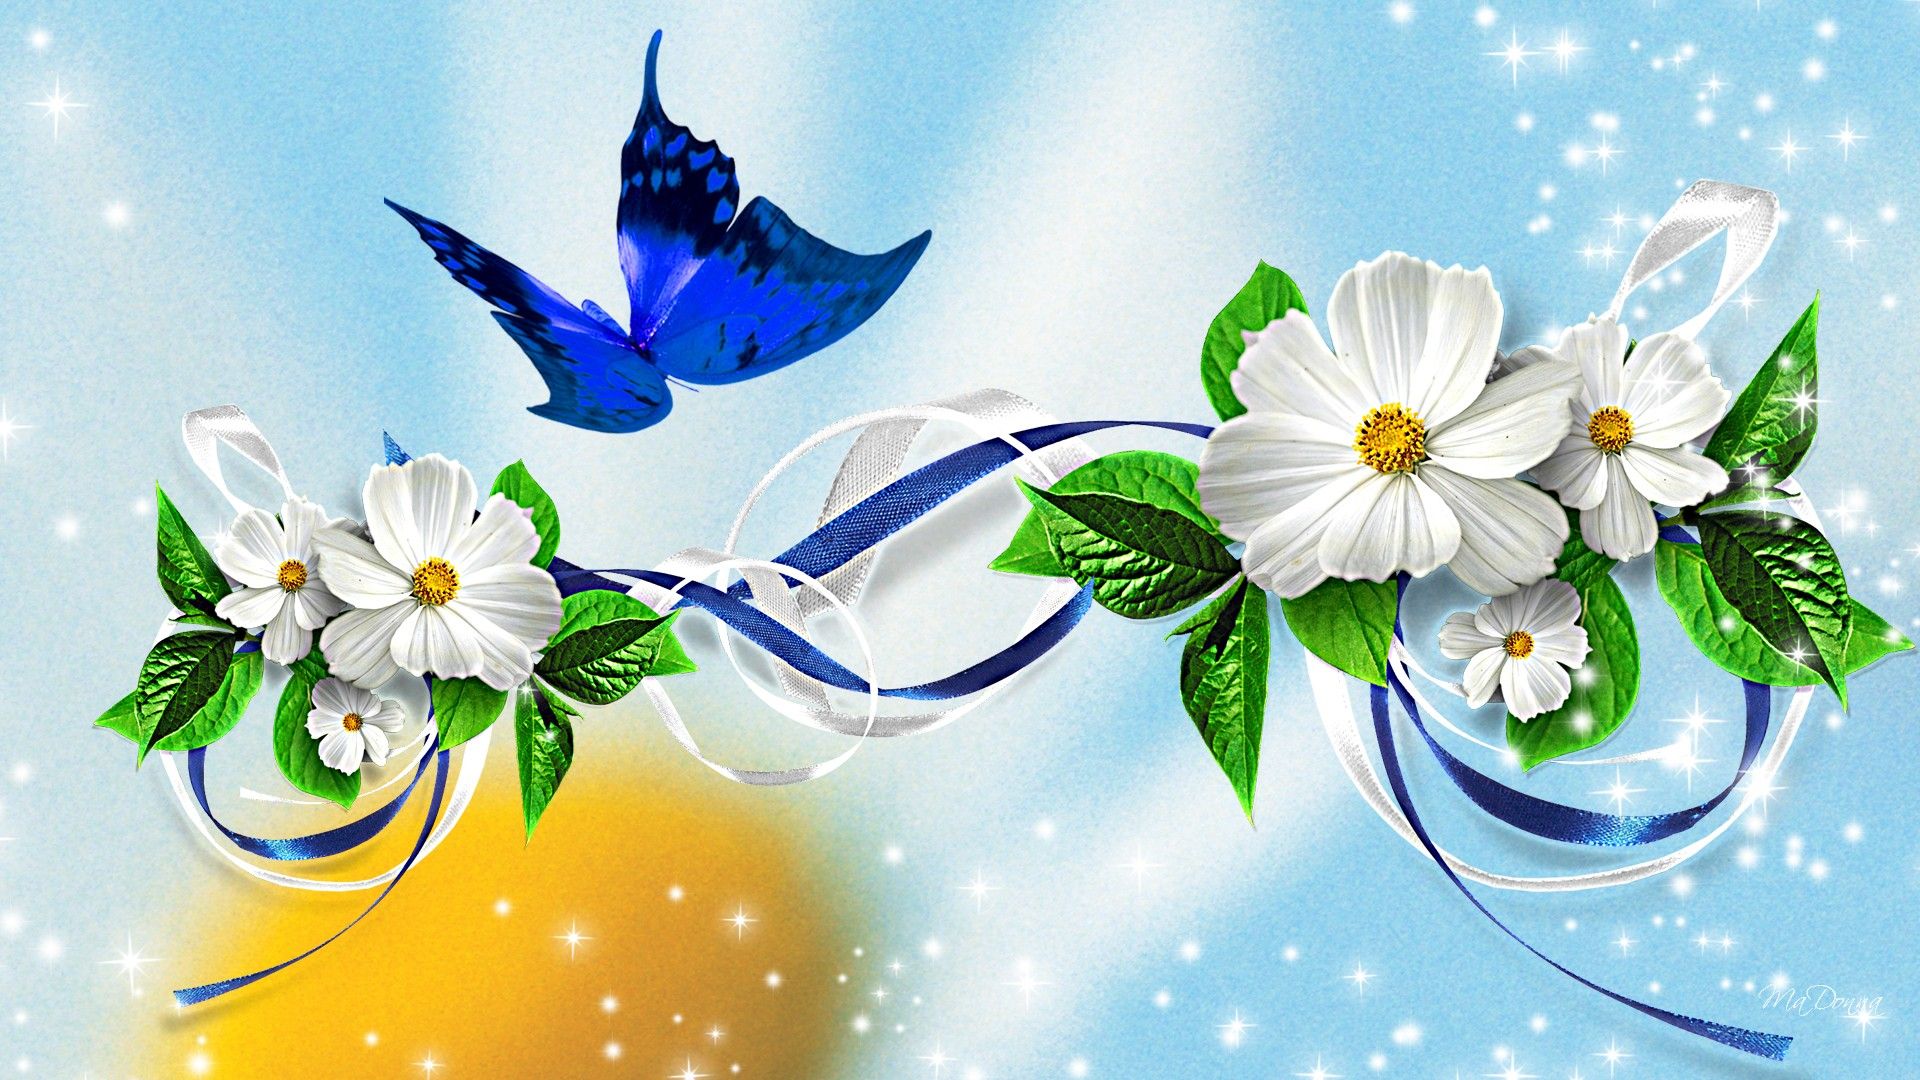 Butterfly and white flowers wallpaper. Flower wallpaper, Blue butterfly wallpaper, Butterfly painting